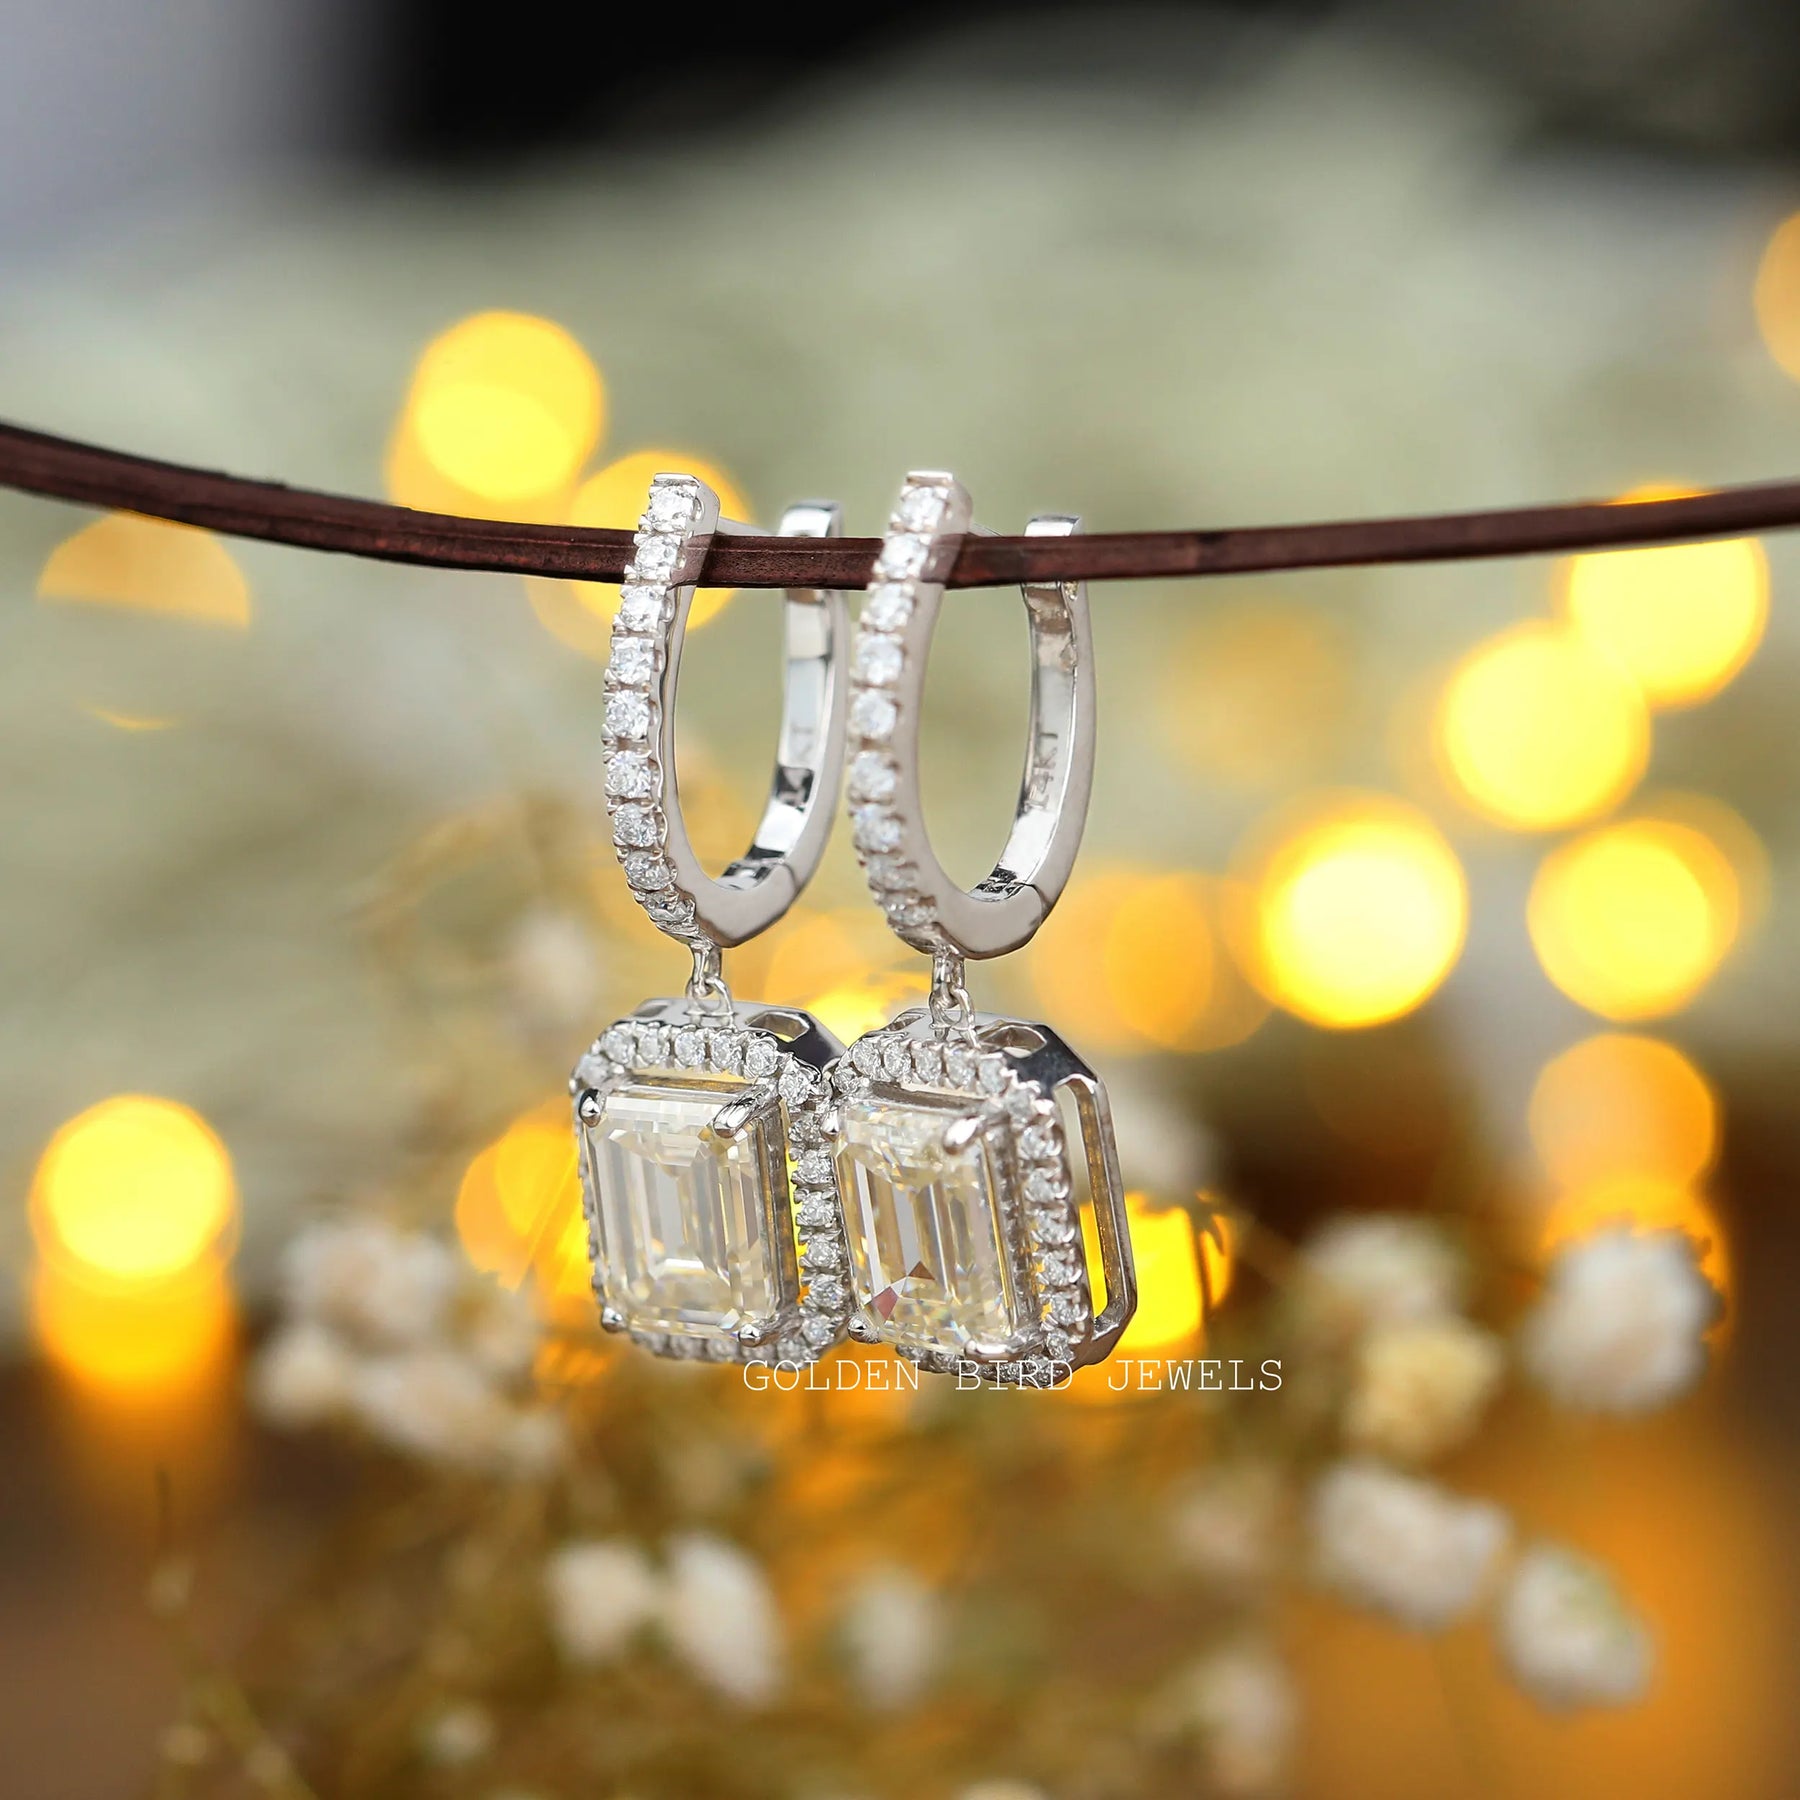 [Dangle Drop Earrings Crafted With Off White Emerald Cut Moissanite]-[Golden Bird Jewels]